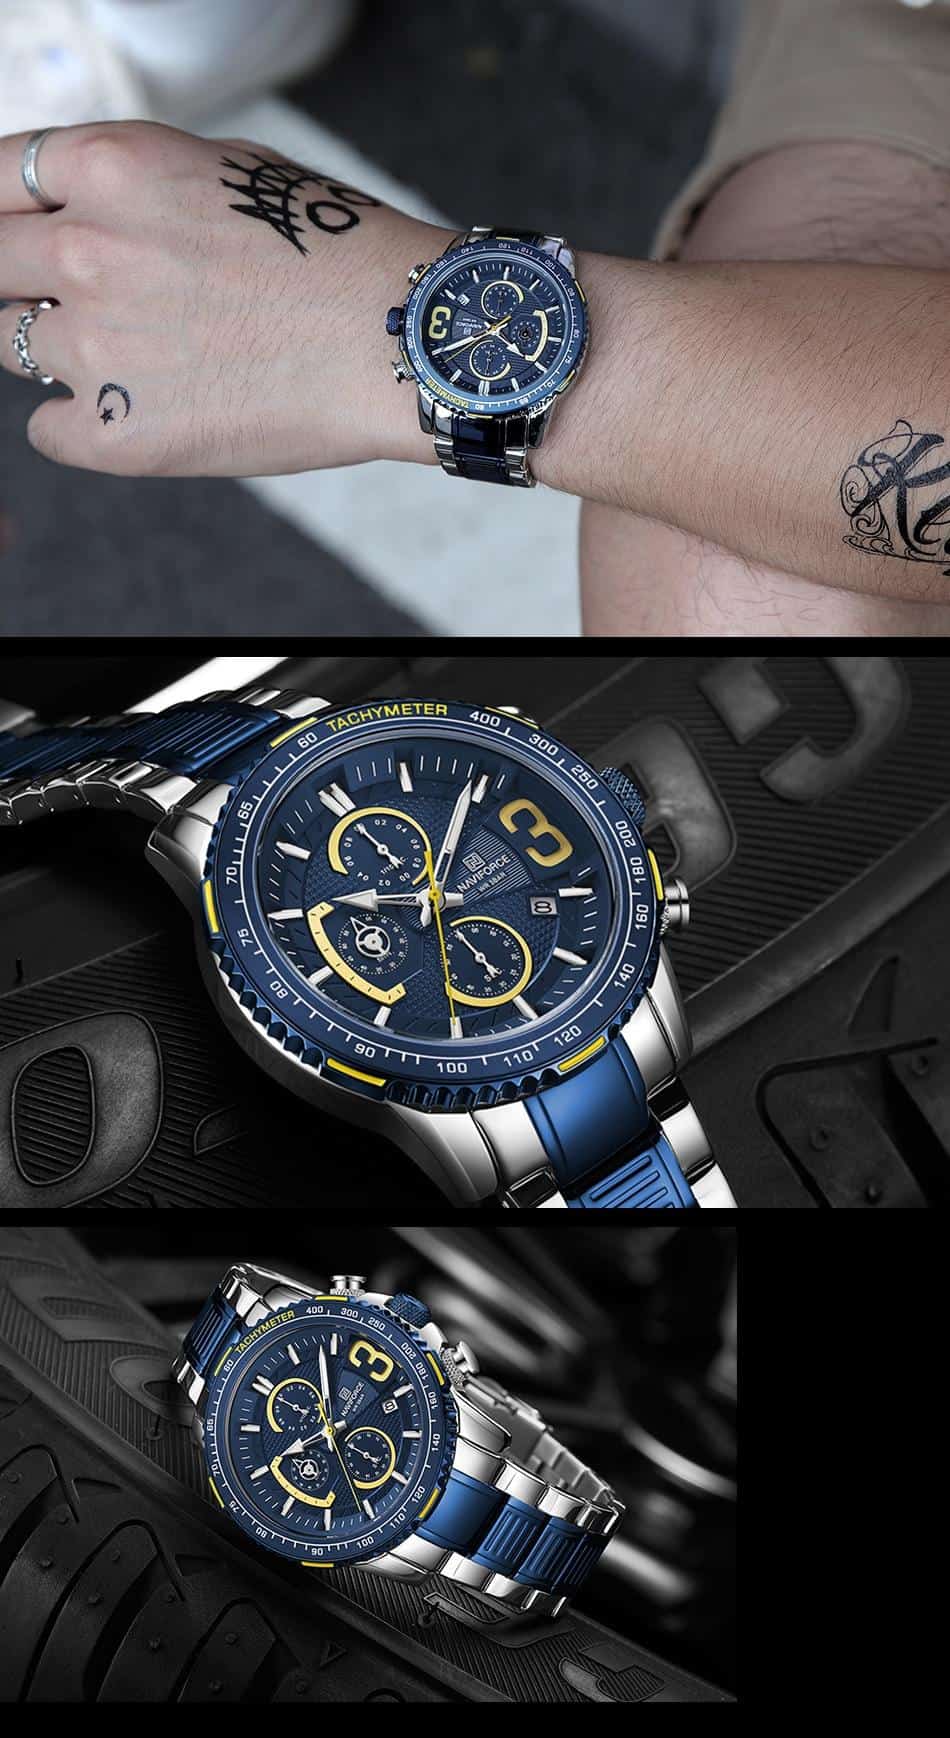 NAVIFORCE Mens Quartz Multifunction Chronograph Sports Watches Fashion Waterproof Military Top Luxury Stainless Steel Wristwatch